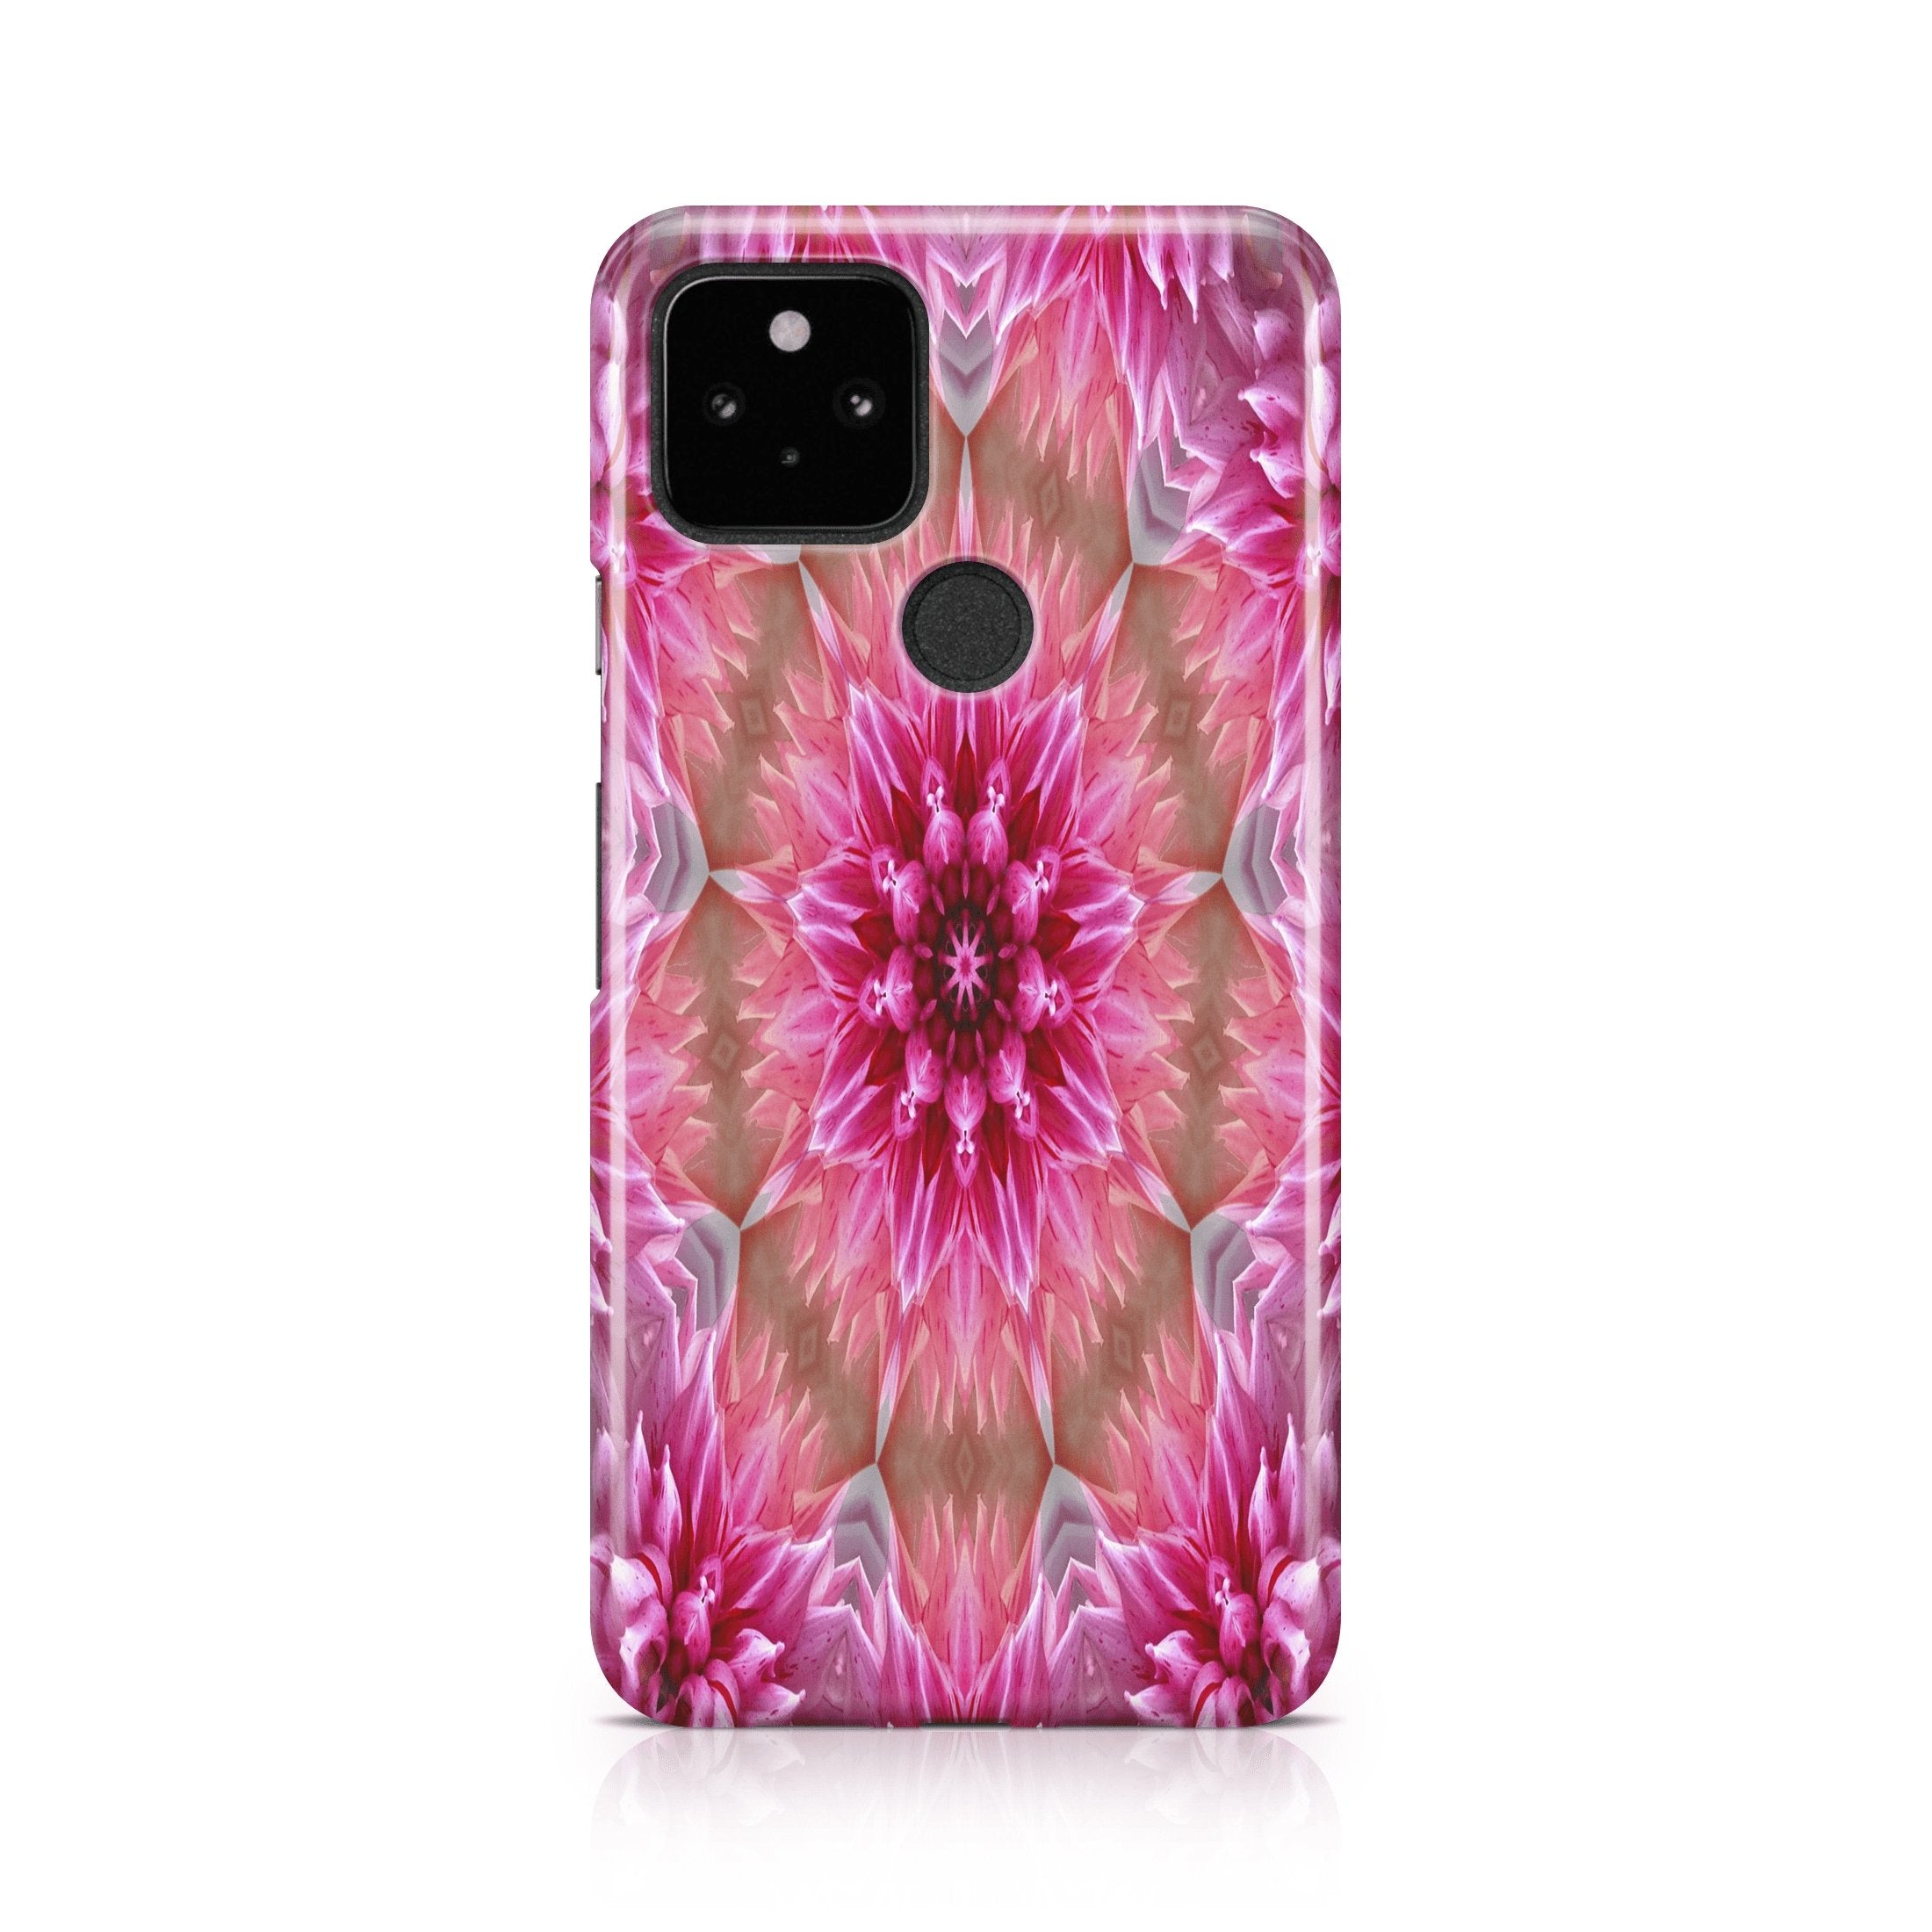 Pink Flowers - Google phone case designs by CaseSwagger